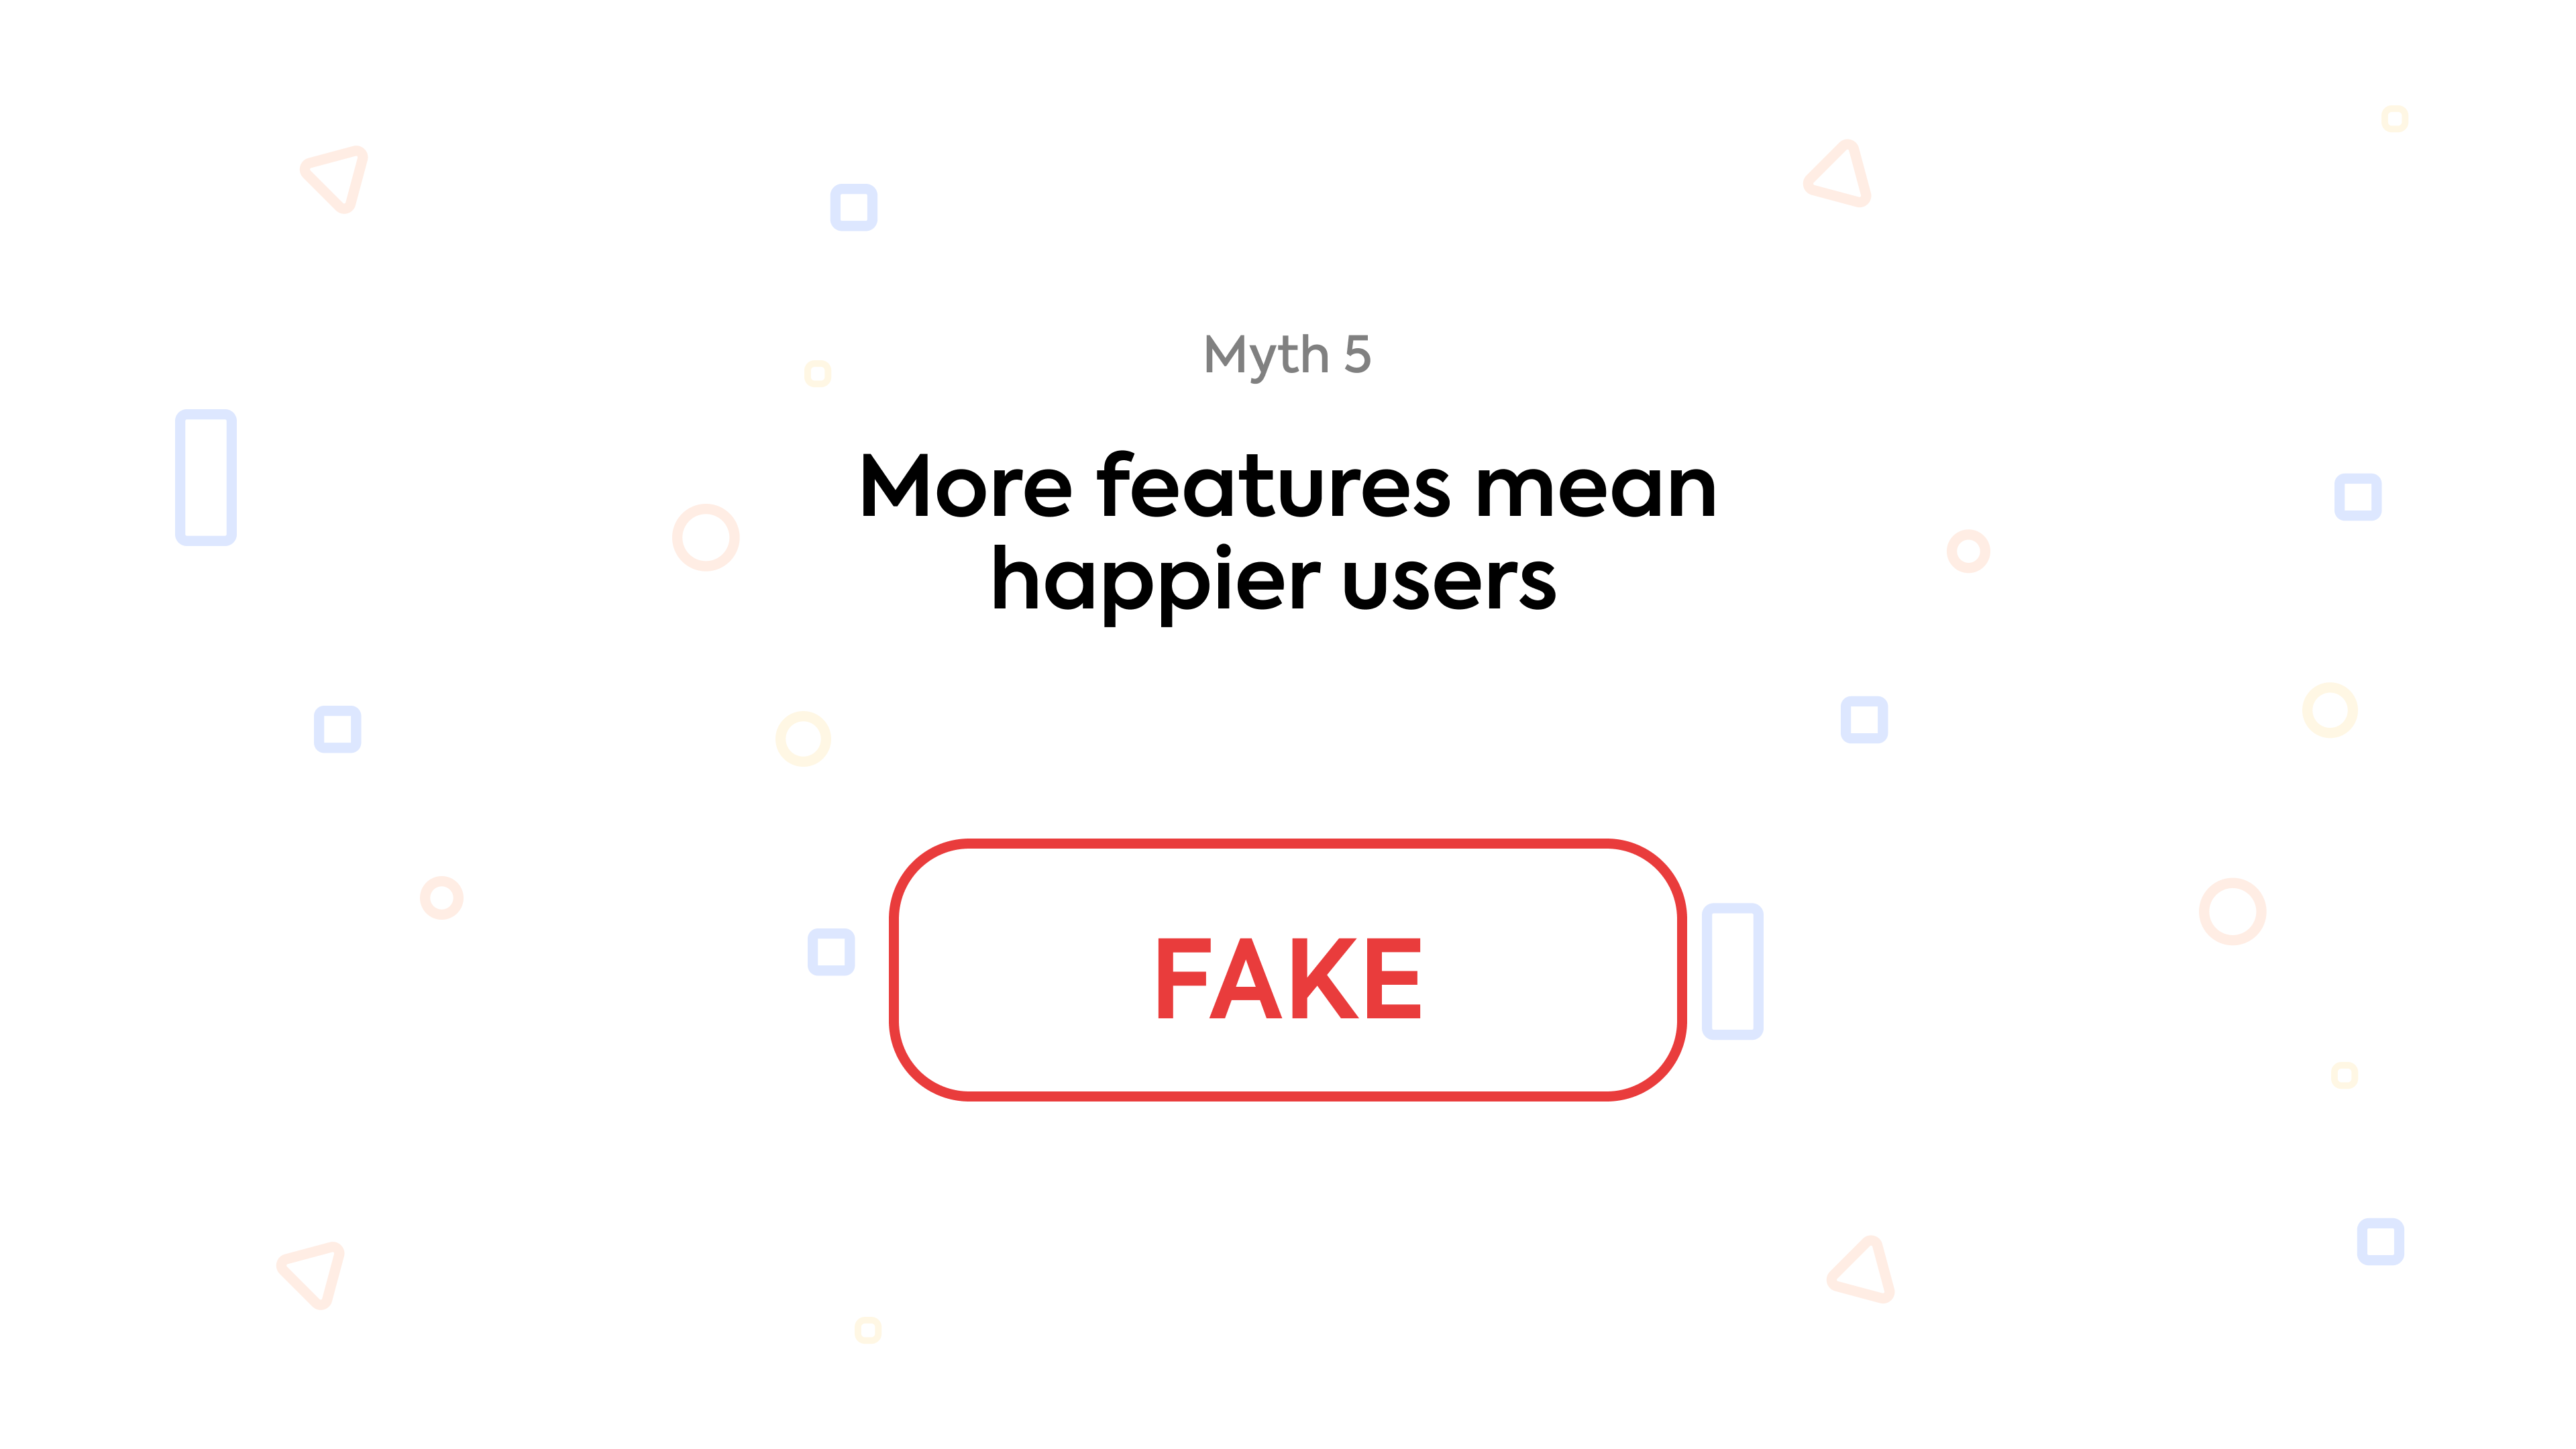 Myth 5: More features mean happier users